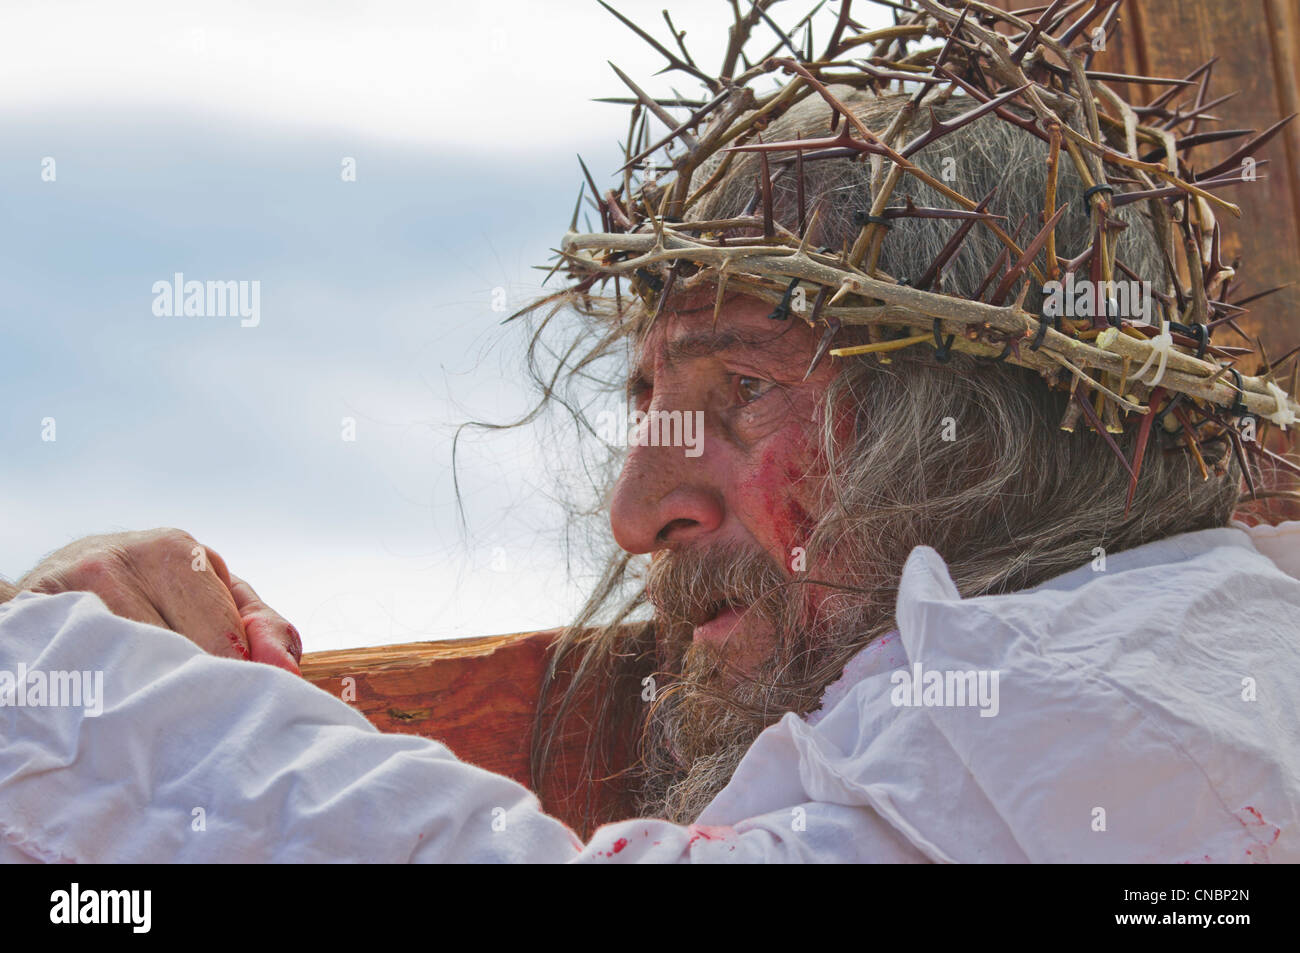 Re-enactement of the Passion of the Christ during Easter celebrations at the Chimayo Sanctuary, New Mexico. Stock Photo